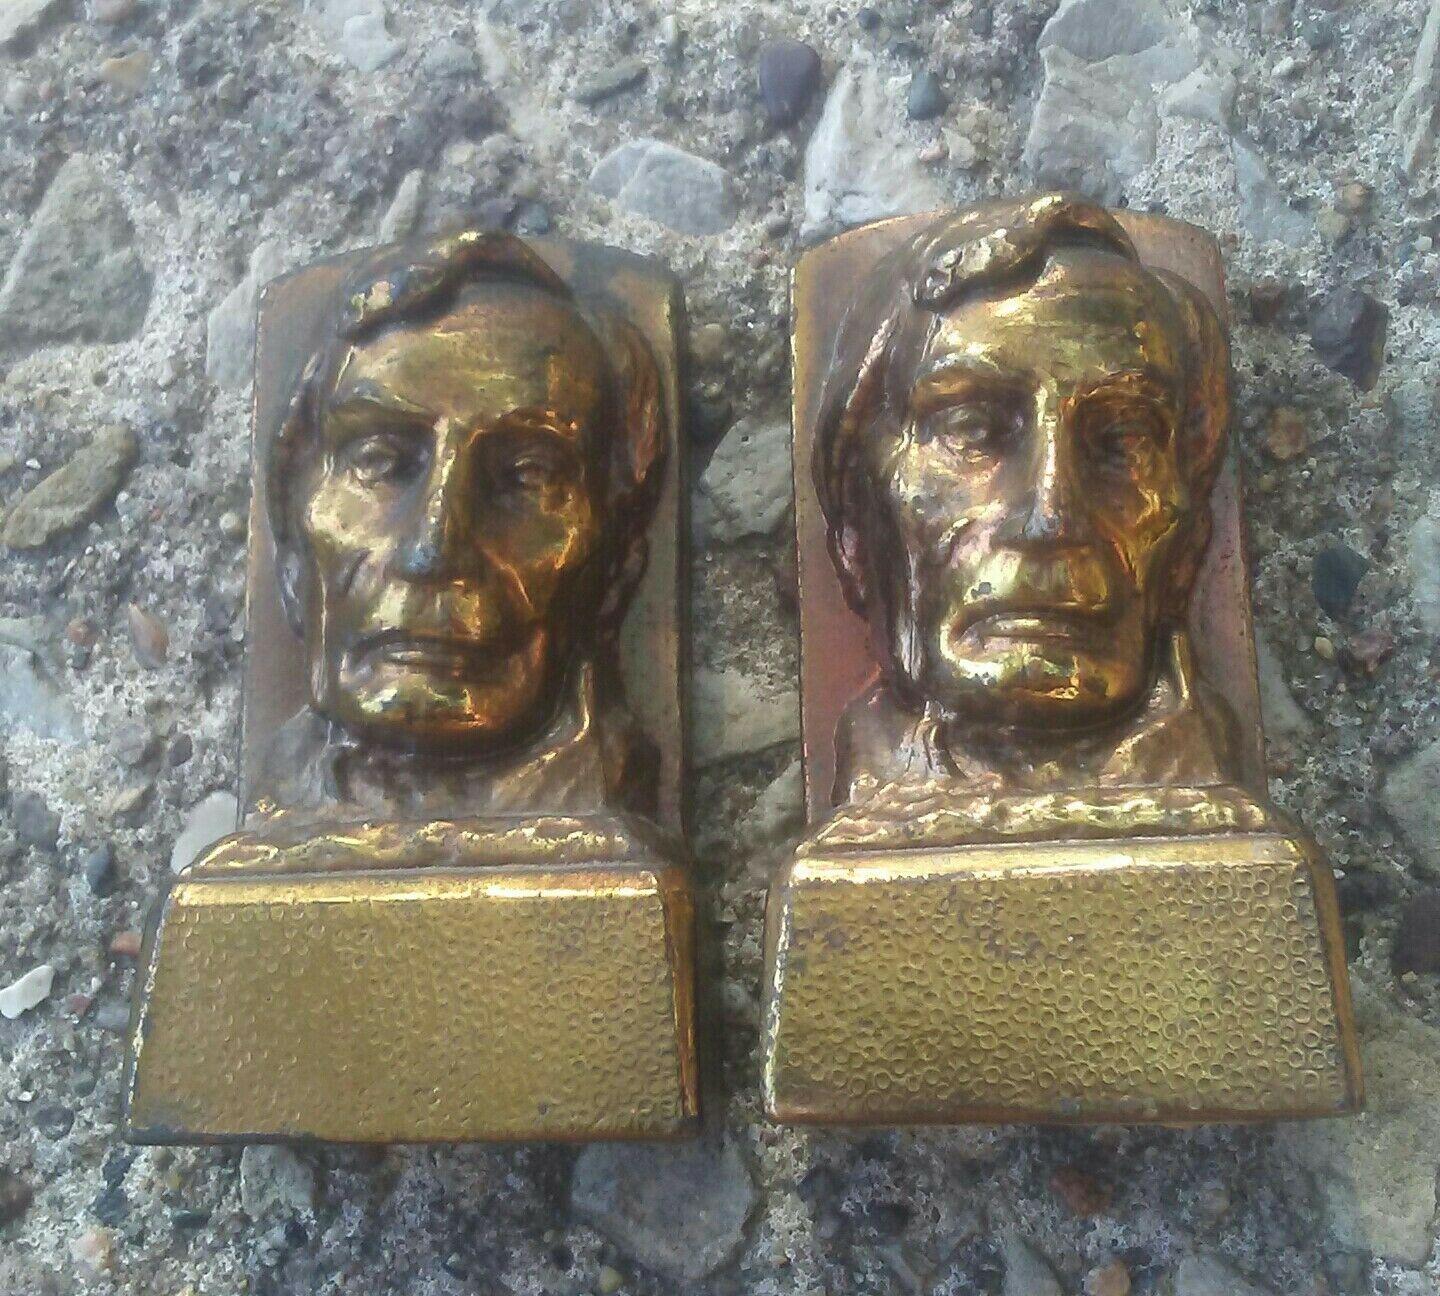 Vintage Small Dodge Usa Abraham Lincoln Bookends.